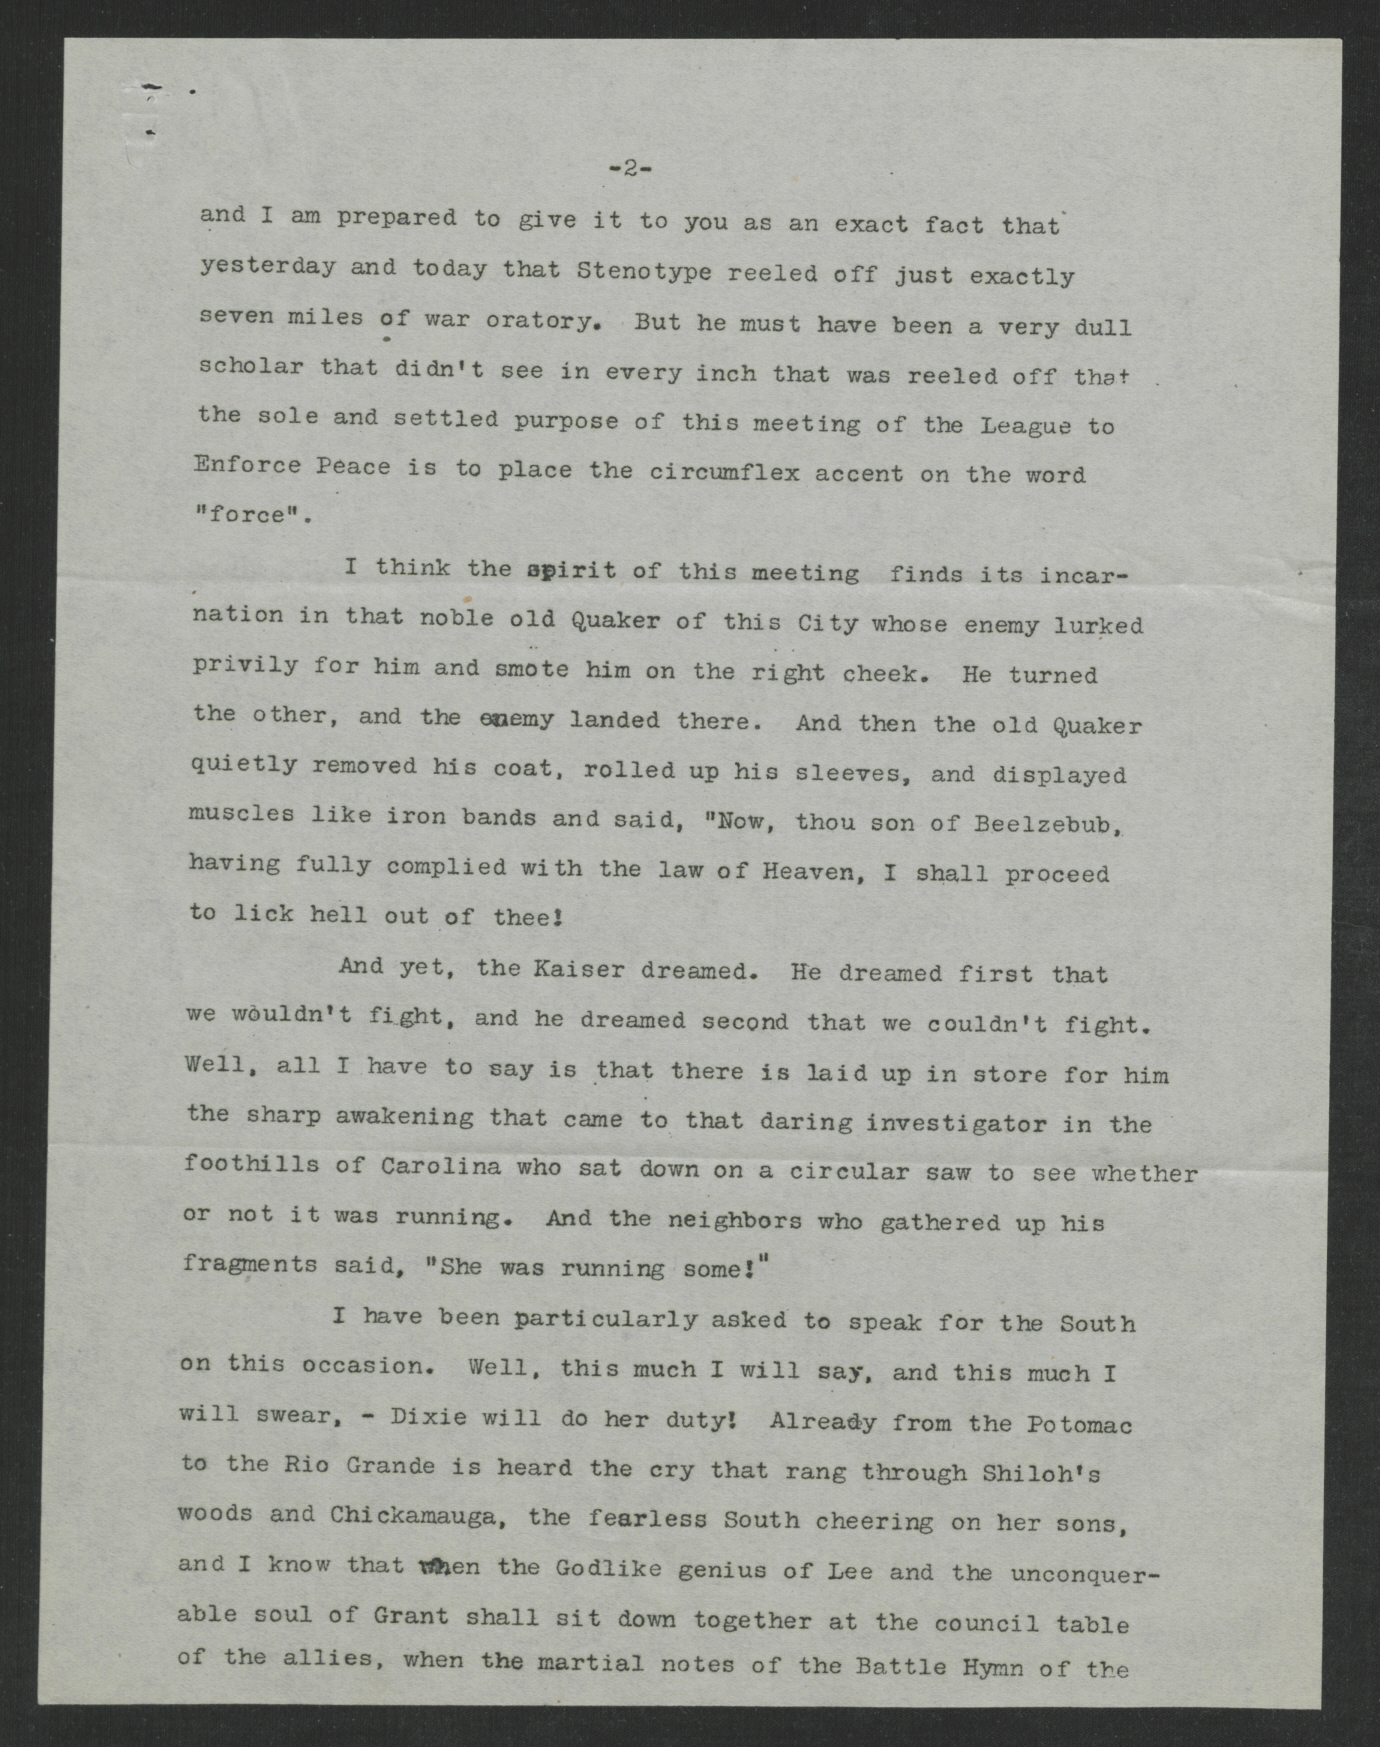 Address Delivered to the Conference of Governors by Governor Thomas W. Bickett, May 17, 1918, page 2